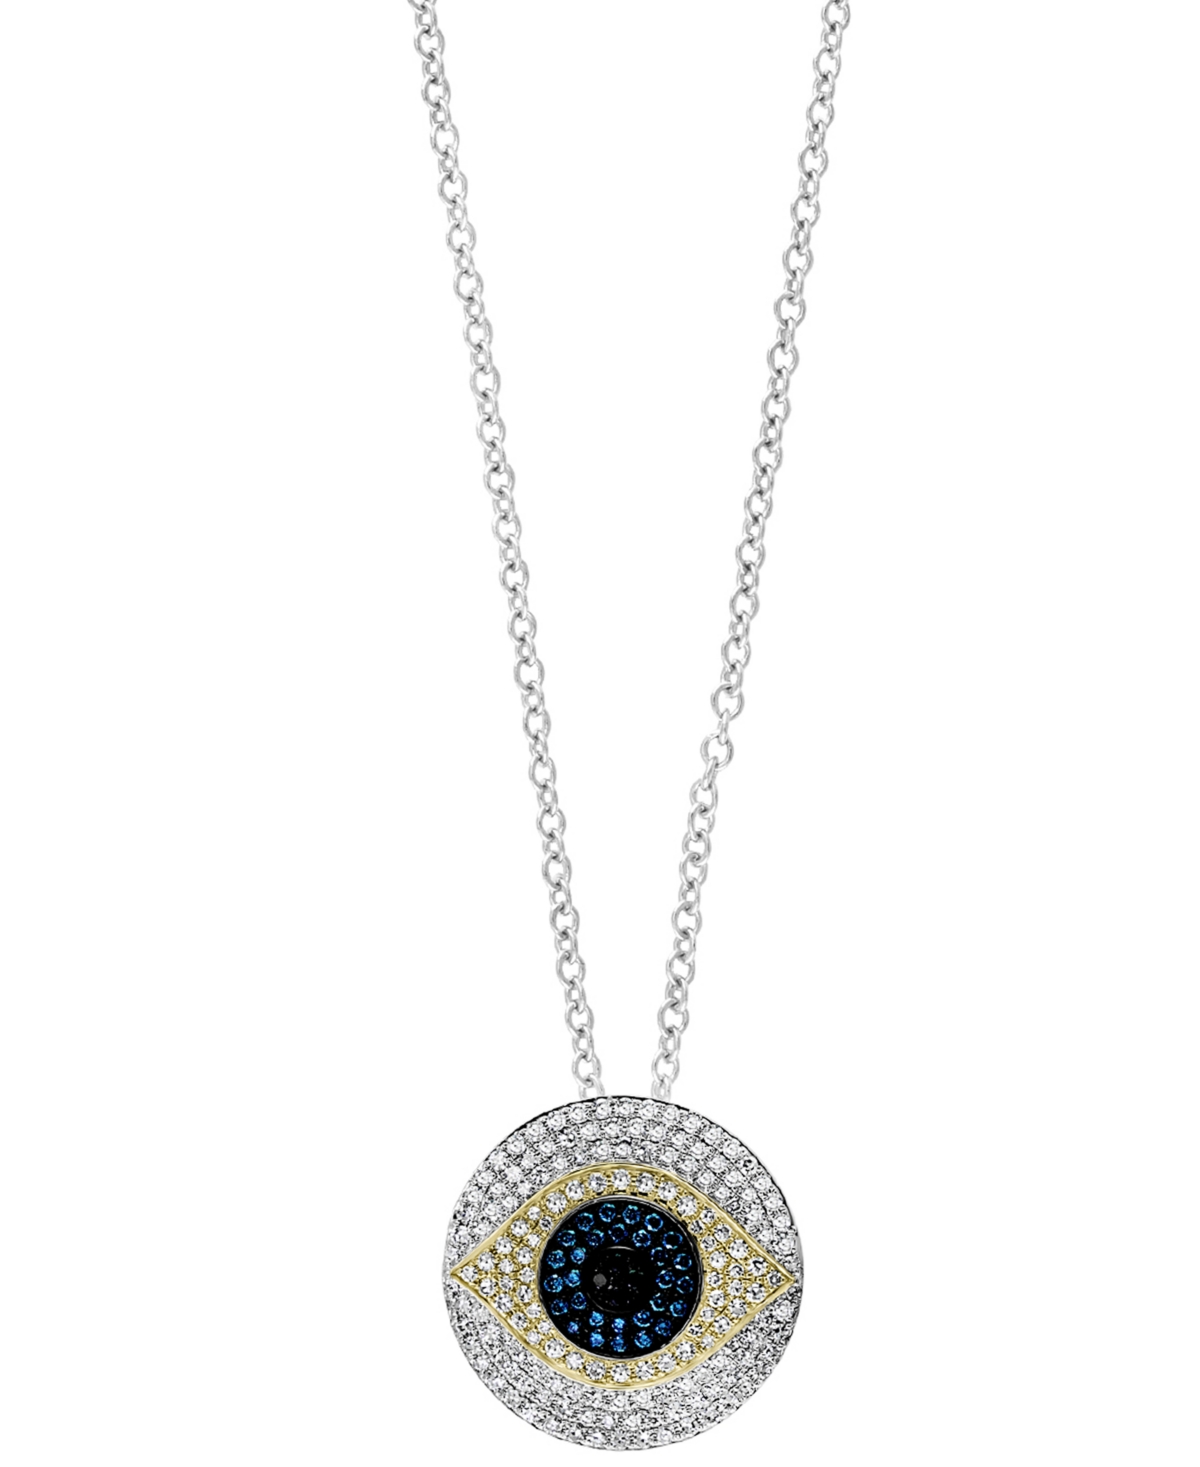 Effy Collection Effy Multicolor Diamond Evil Eye 18" Pendant Necklace (7/8 ct. t.w.) in 14k White & Yellow Gold